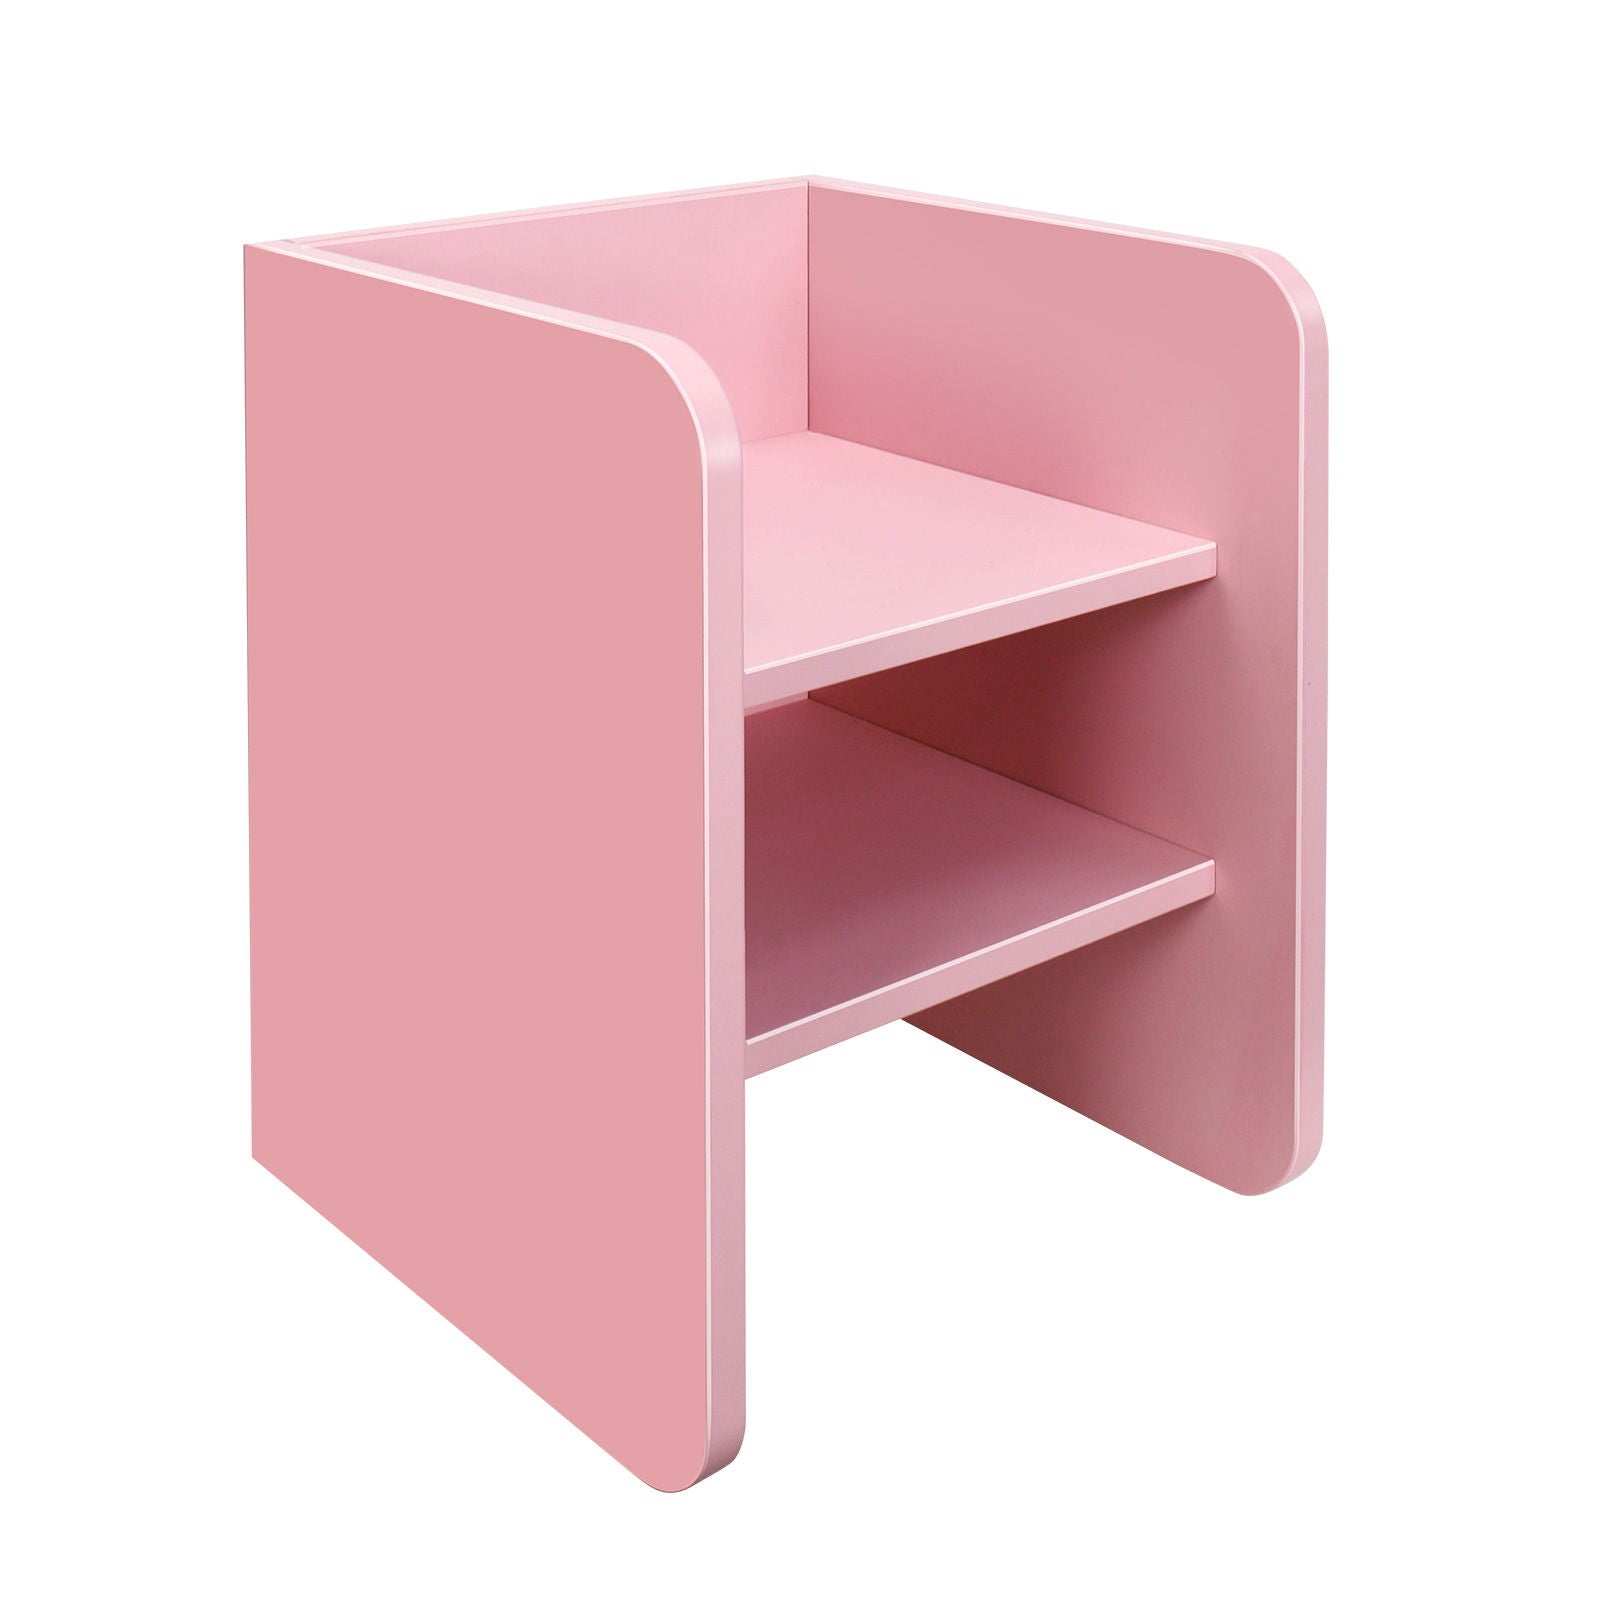 Multi-Functional Storage Cube, Highly Collocable End Table / Side Table / Night Stand / Bedside Table / Bookshelf And Stackable Organizer Display Shelf For Any Space, Carb Certified Non - Toxic (Pink)